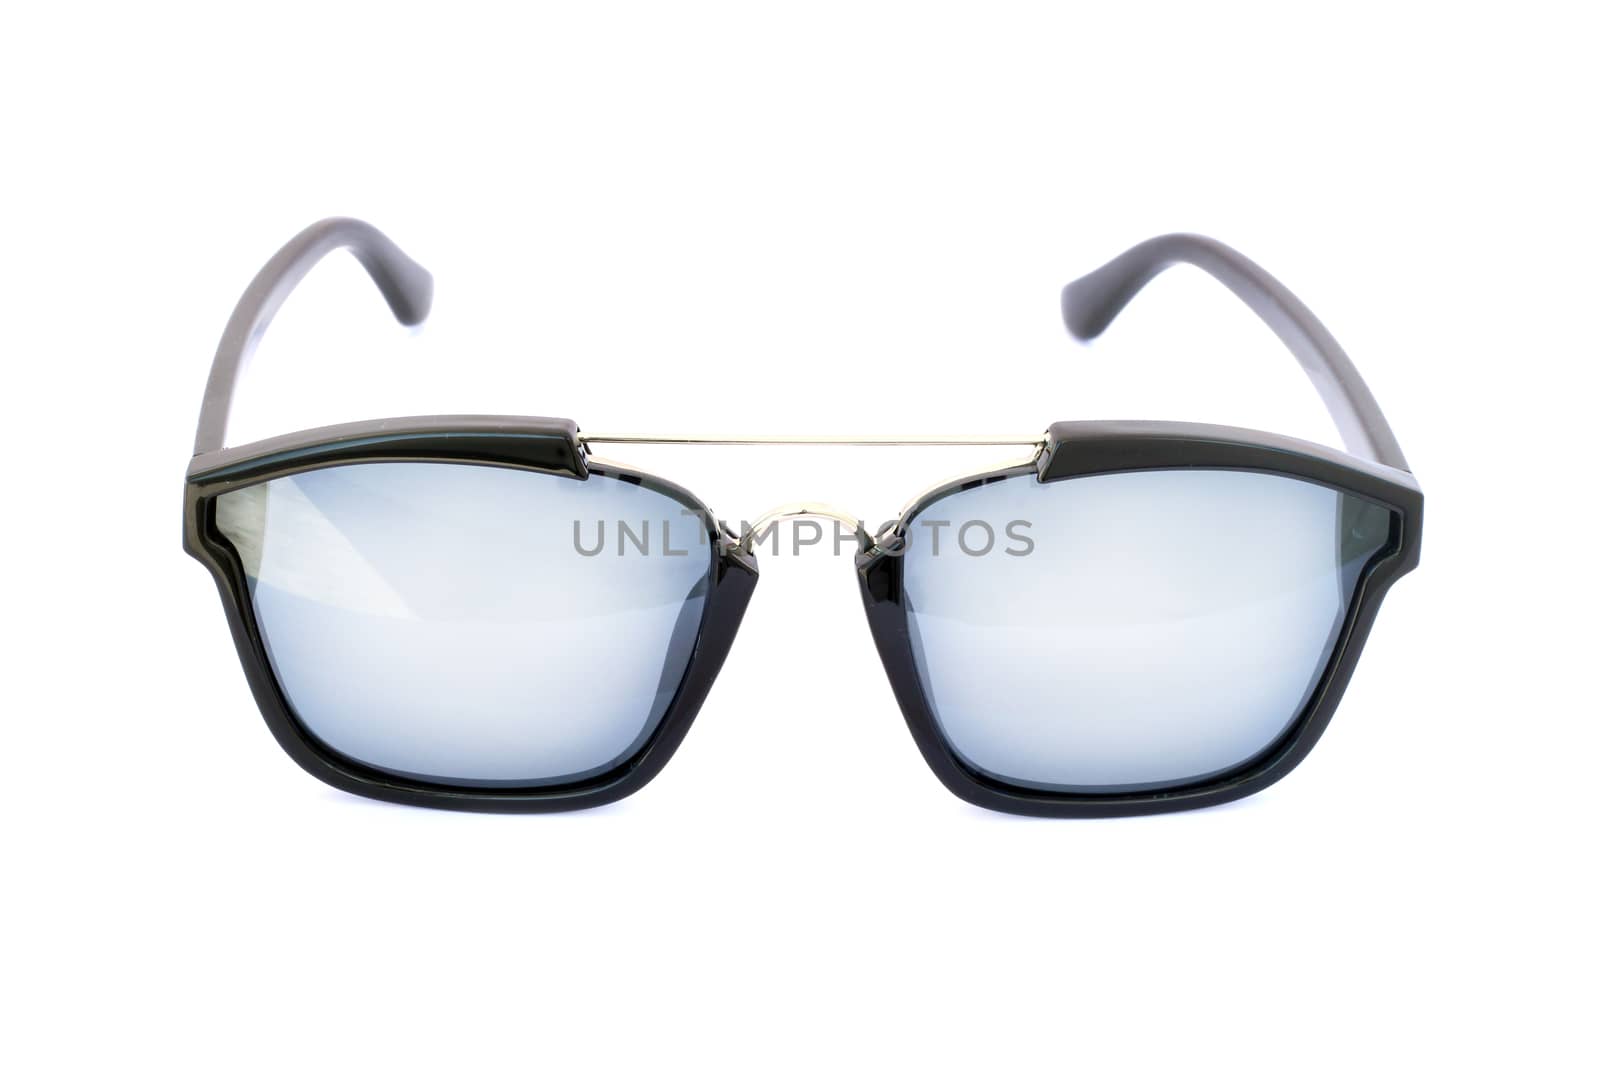 Image of black glasses on a white background